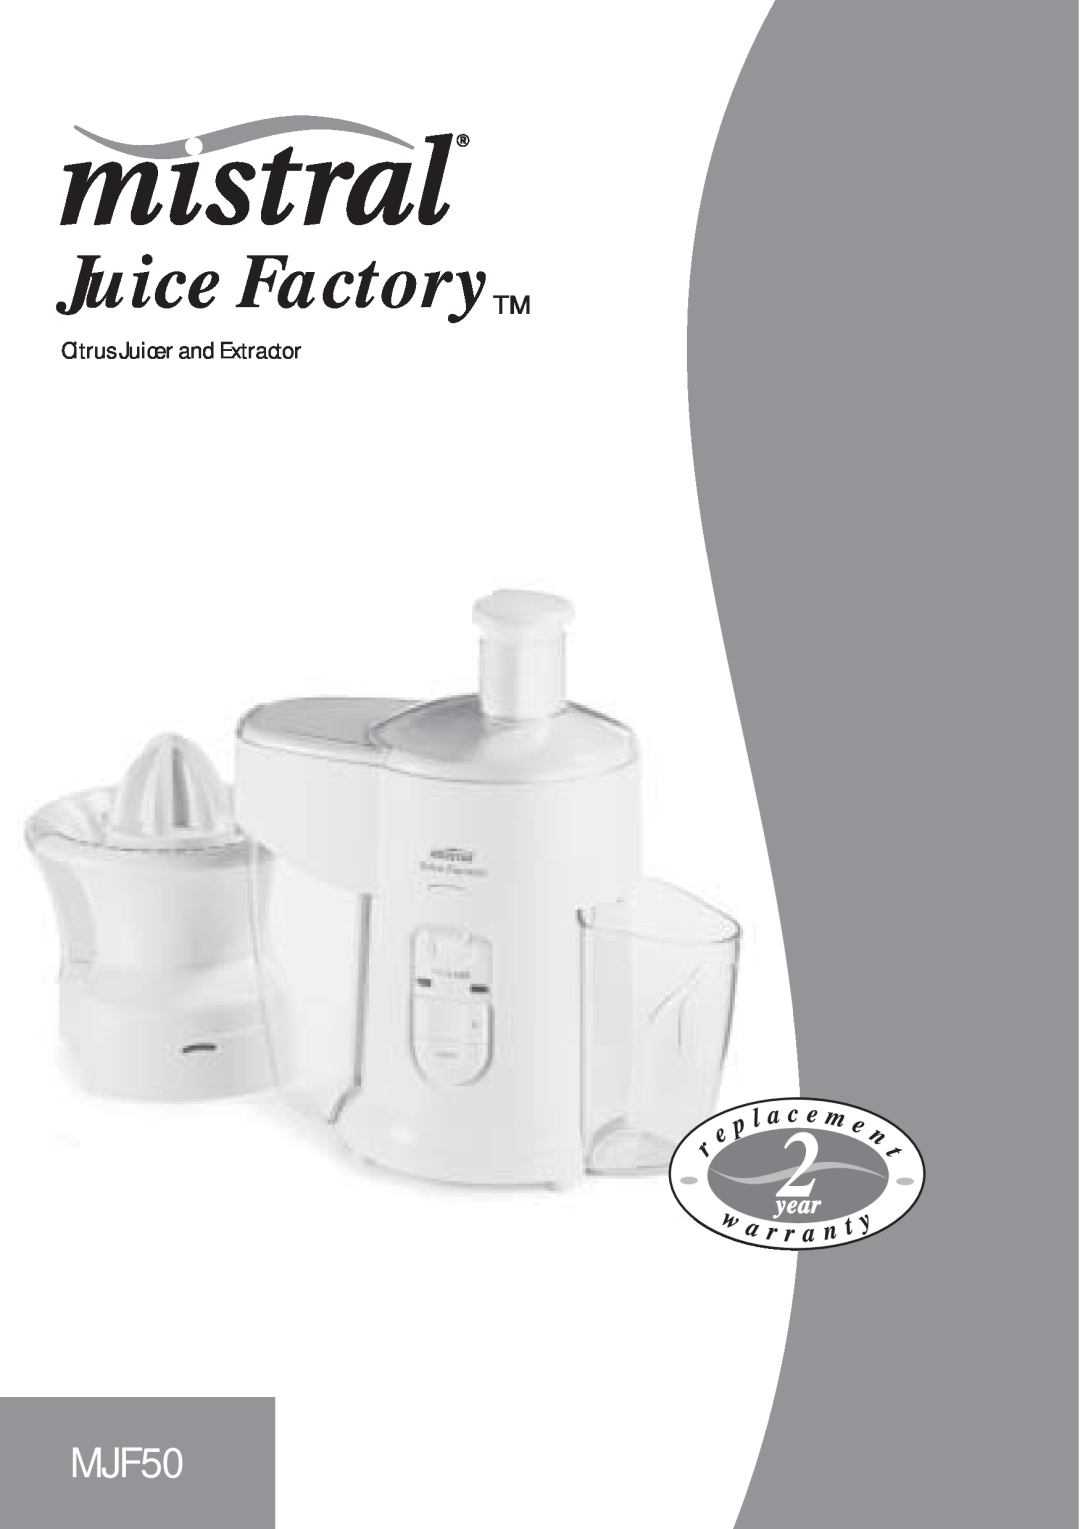 Mistral MJF50 manual Juice Factory, Citrus Juicer and Extractor 